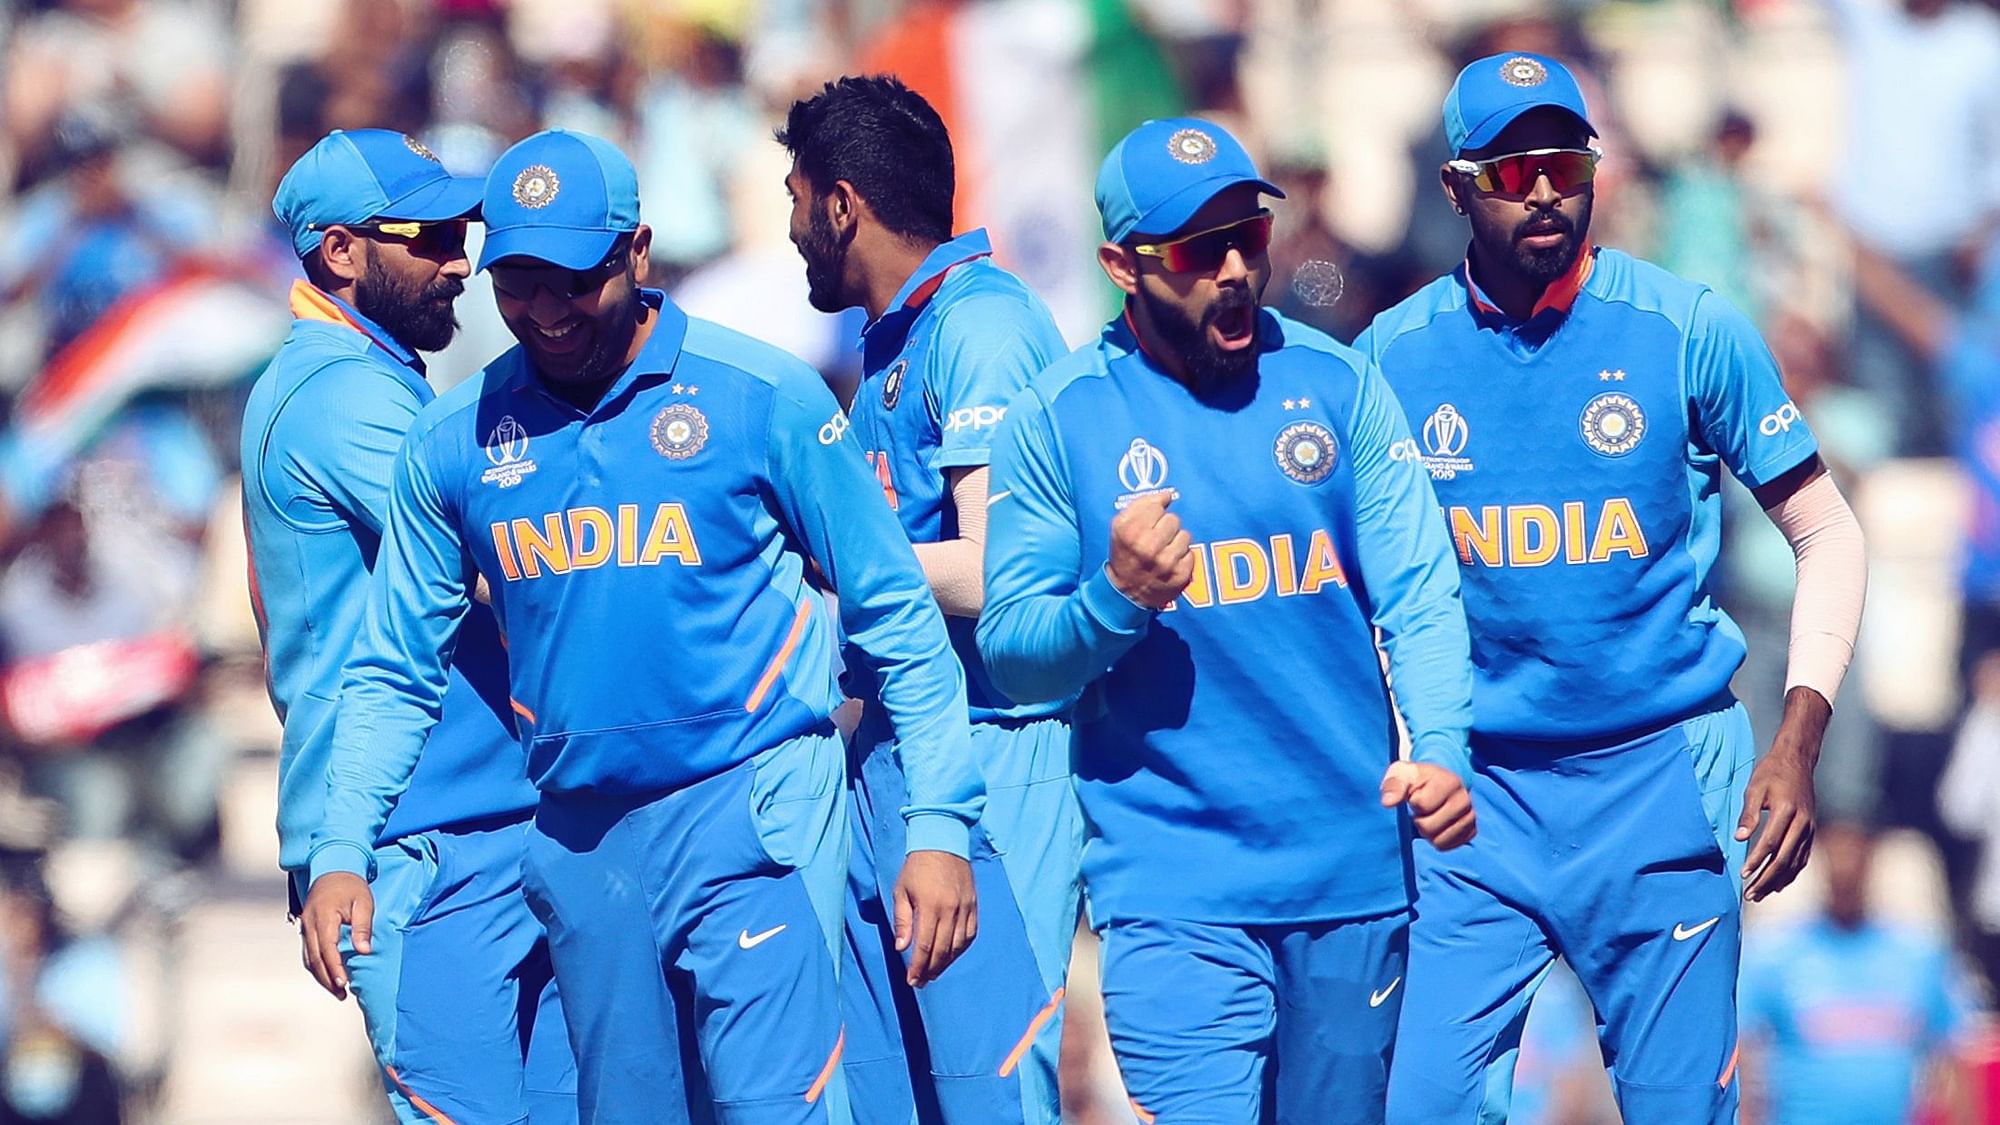 India maintained their unbeaten run in the campaign after winning against Afghanistan.&nbsp;